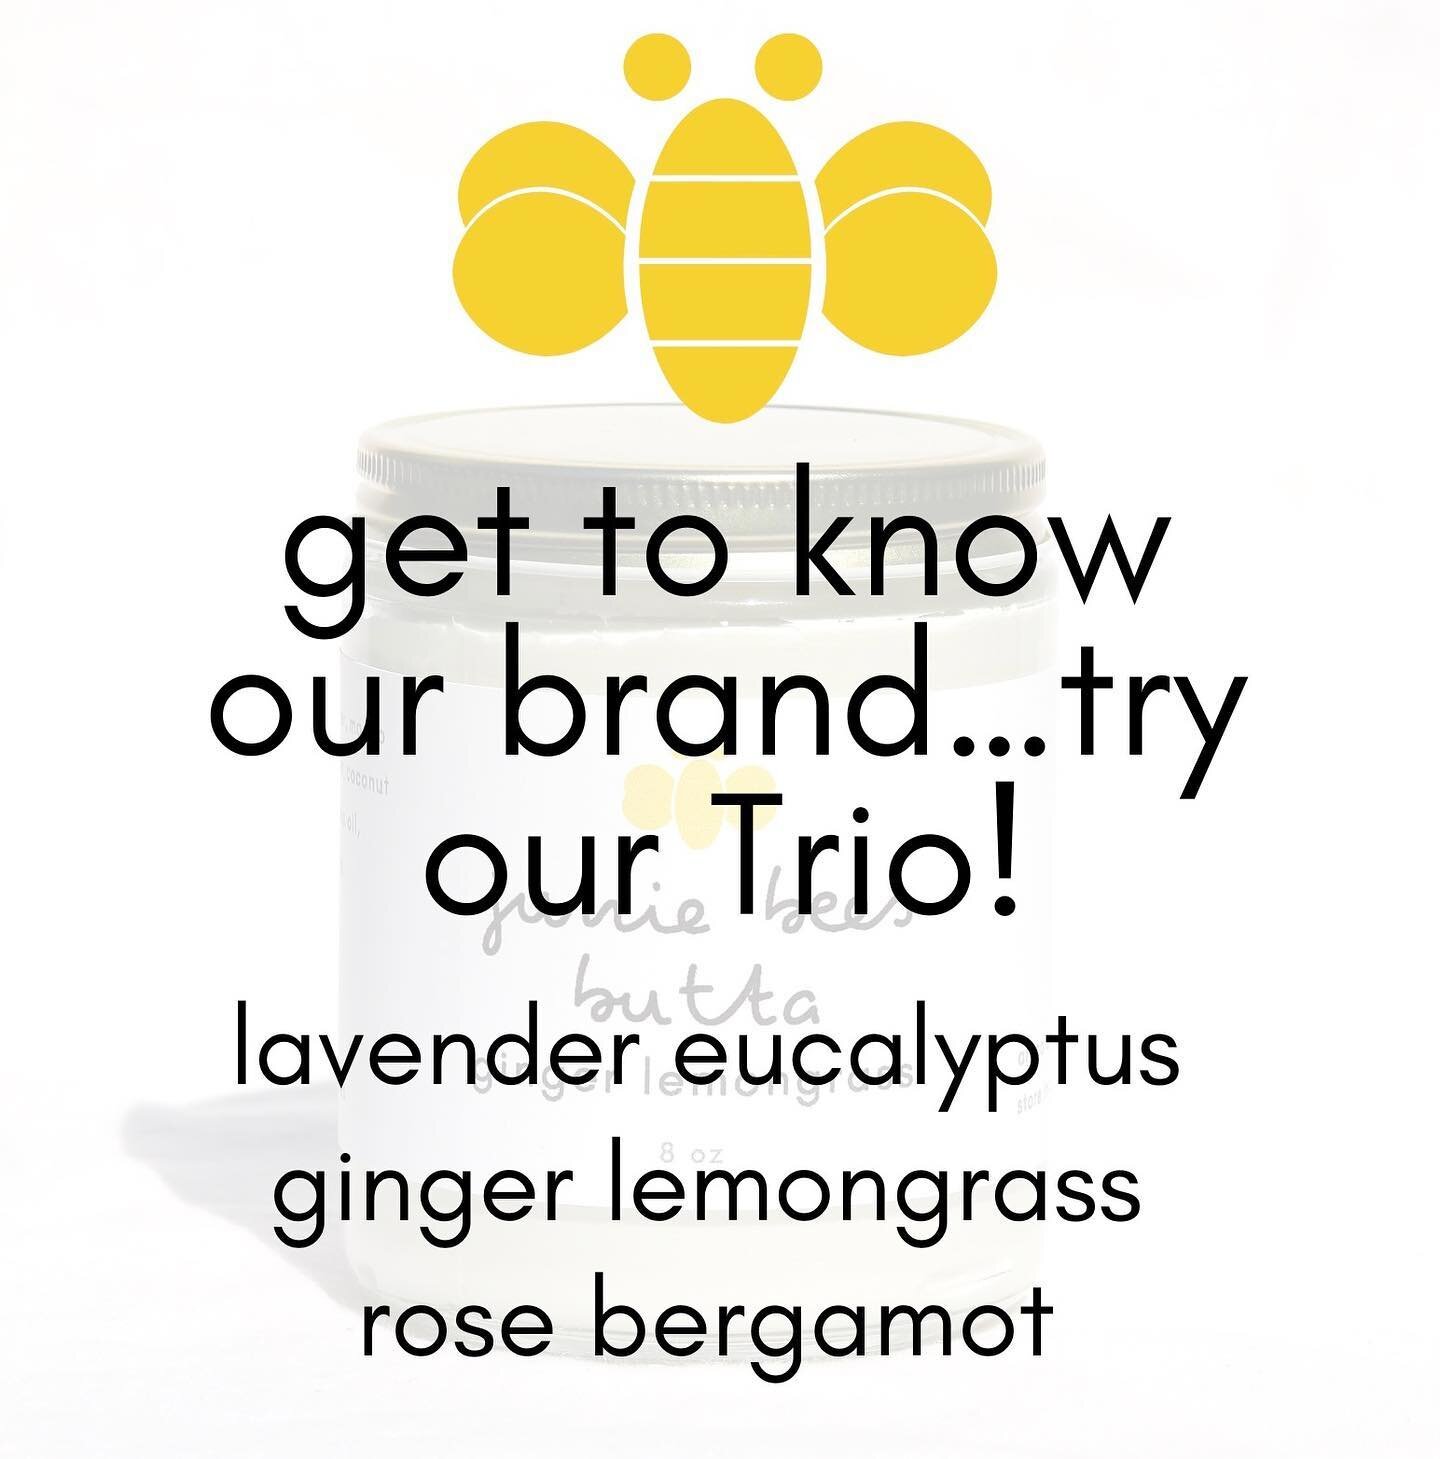 If you&rsquo;re new here and still haven&rsquo;t tried our Butta, get to know our brand and try our TRIO! Choose our signature scents&hellip;Ginger Lemongrass, Rose Bergamot, and Lavender Eucalyptus. You will be happy you did! ❤️ link in bio #youbutt